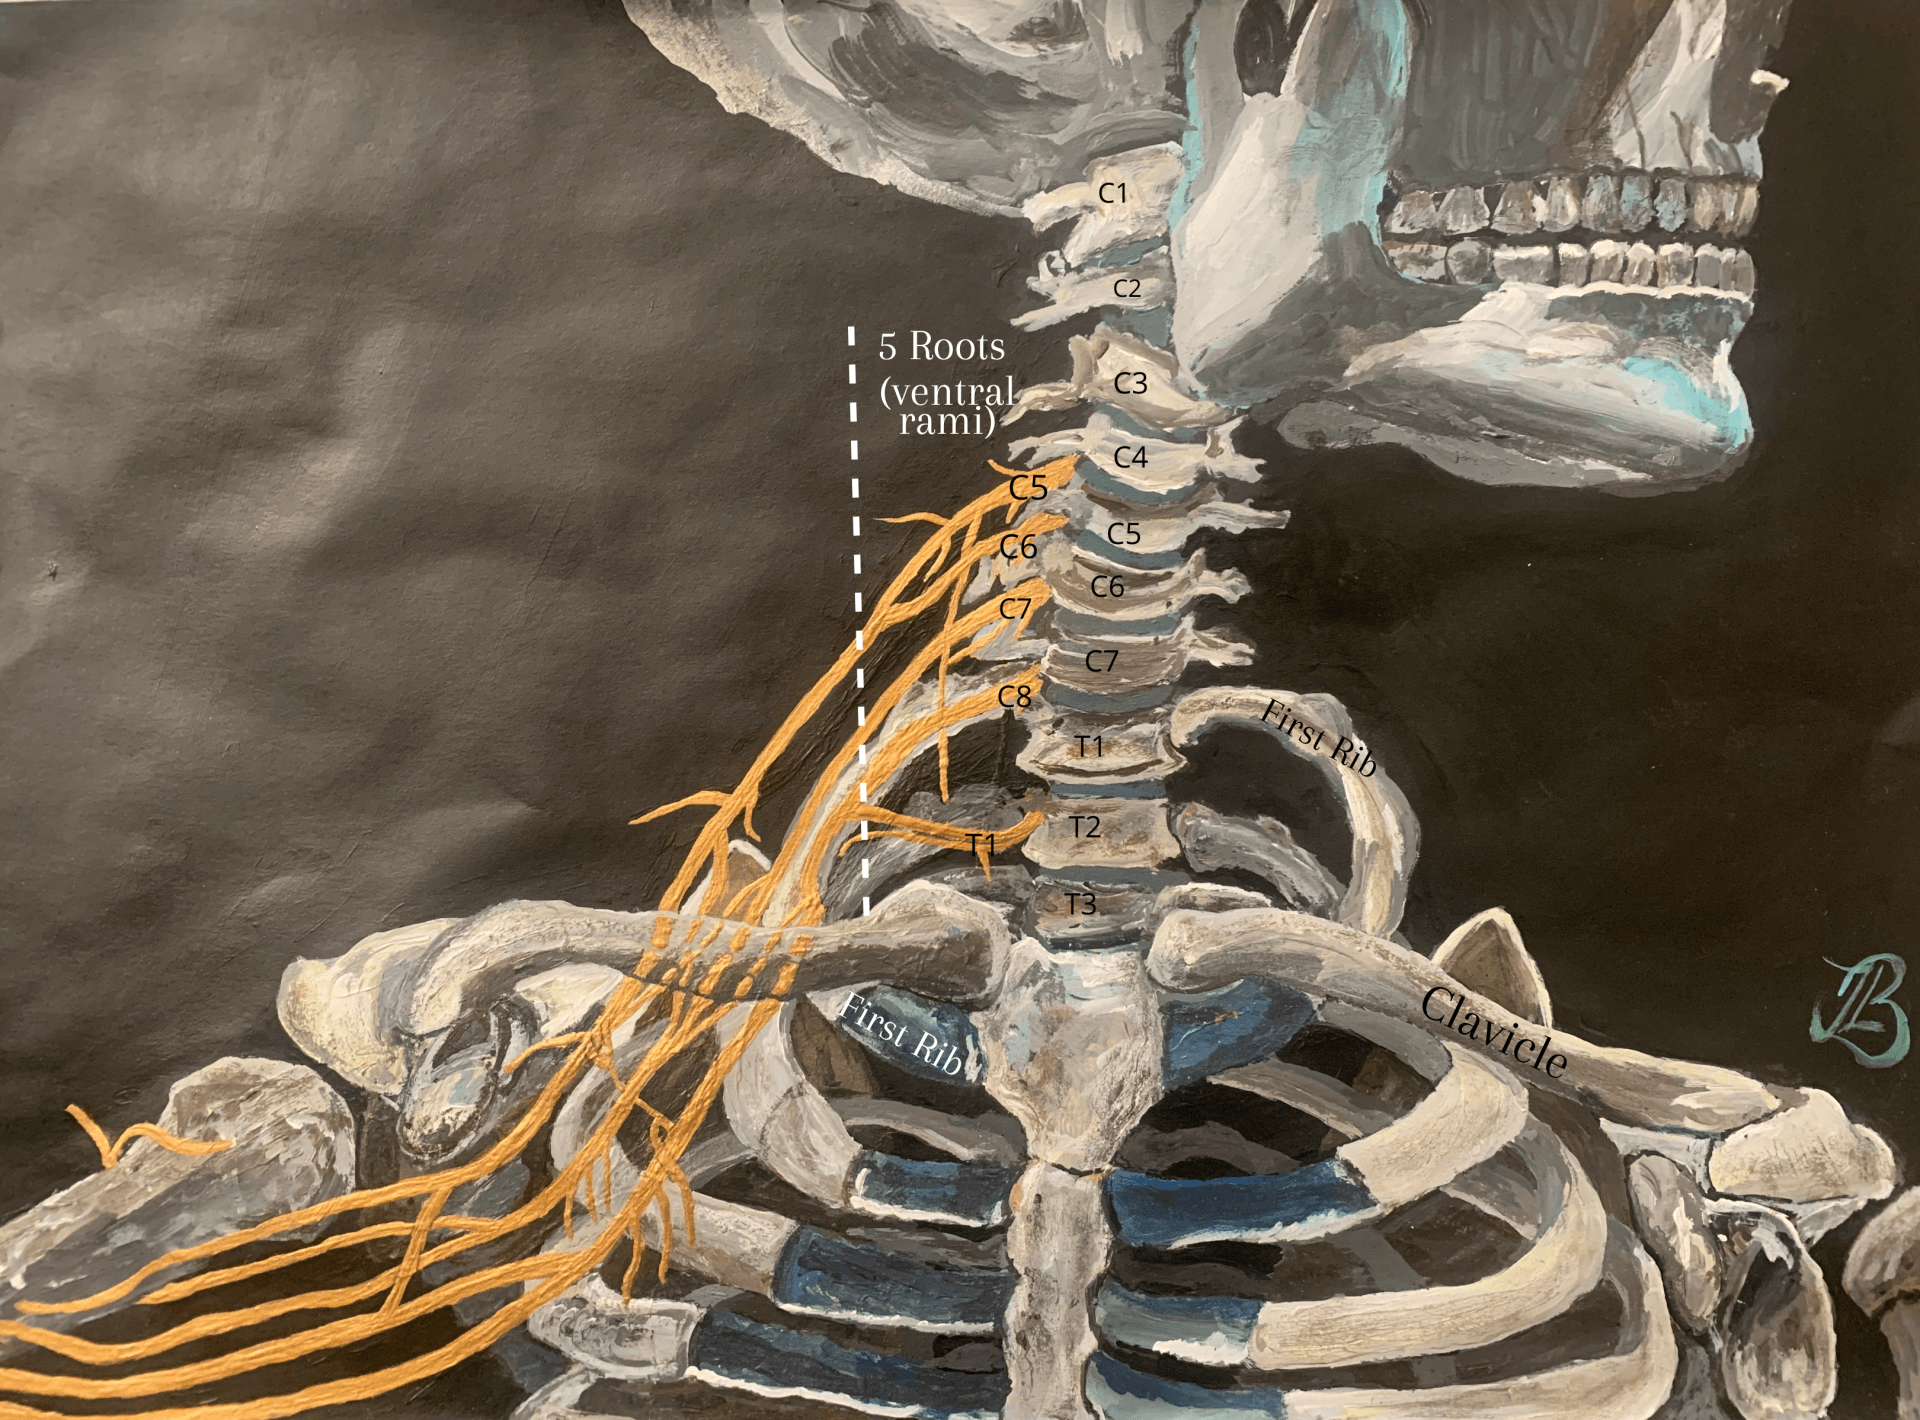 The nerve roots from the neck